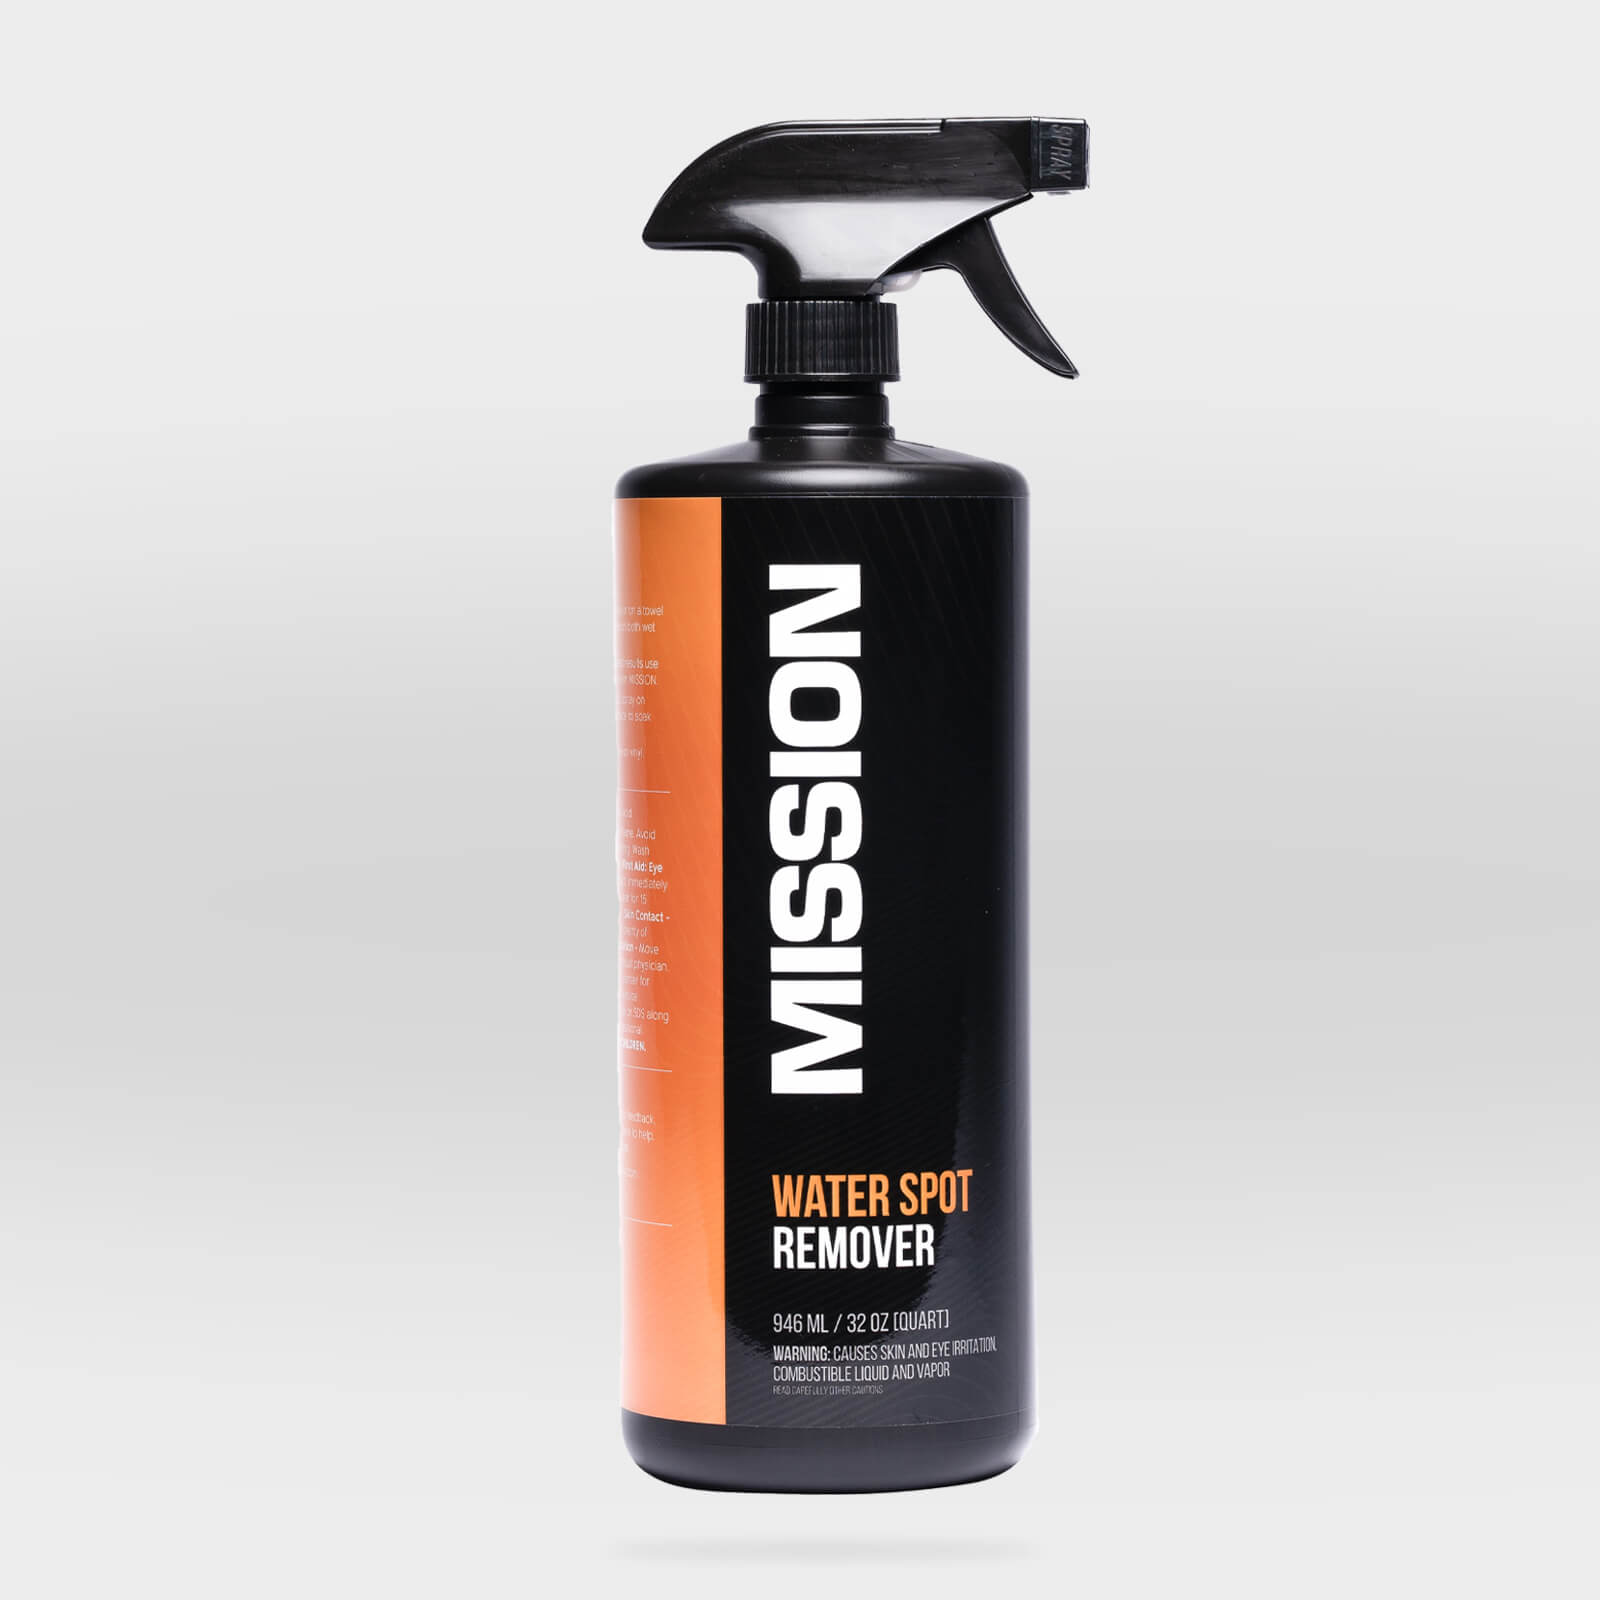 MISSION boat water spot remover